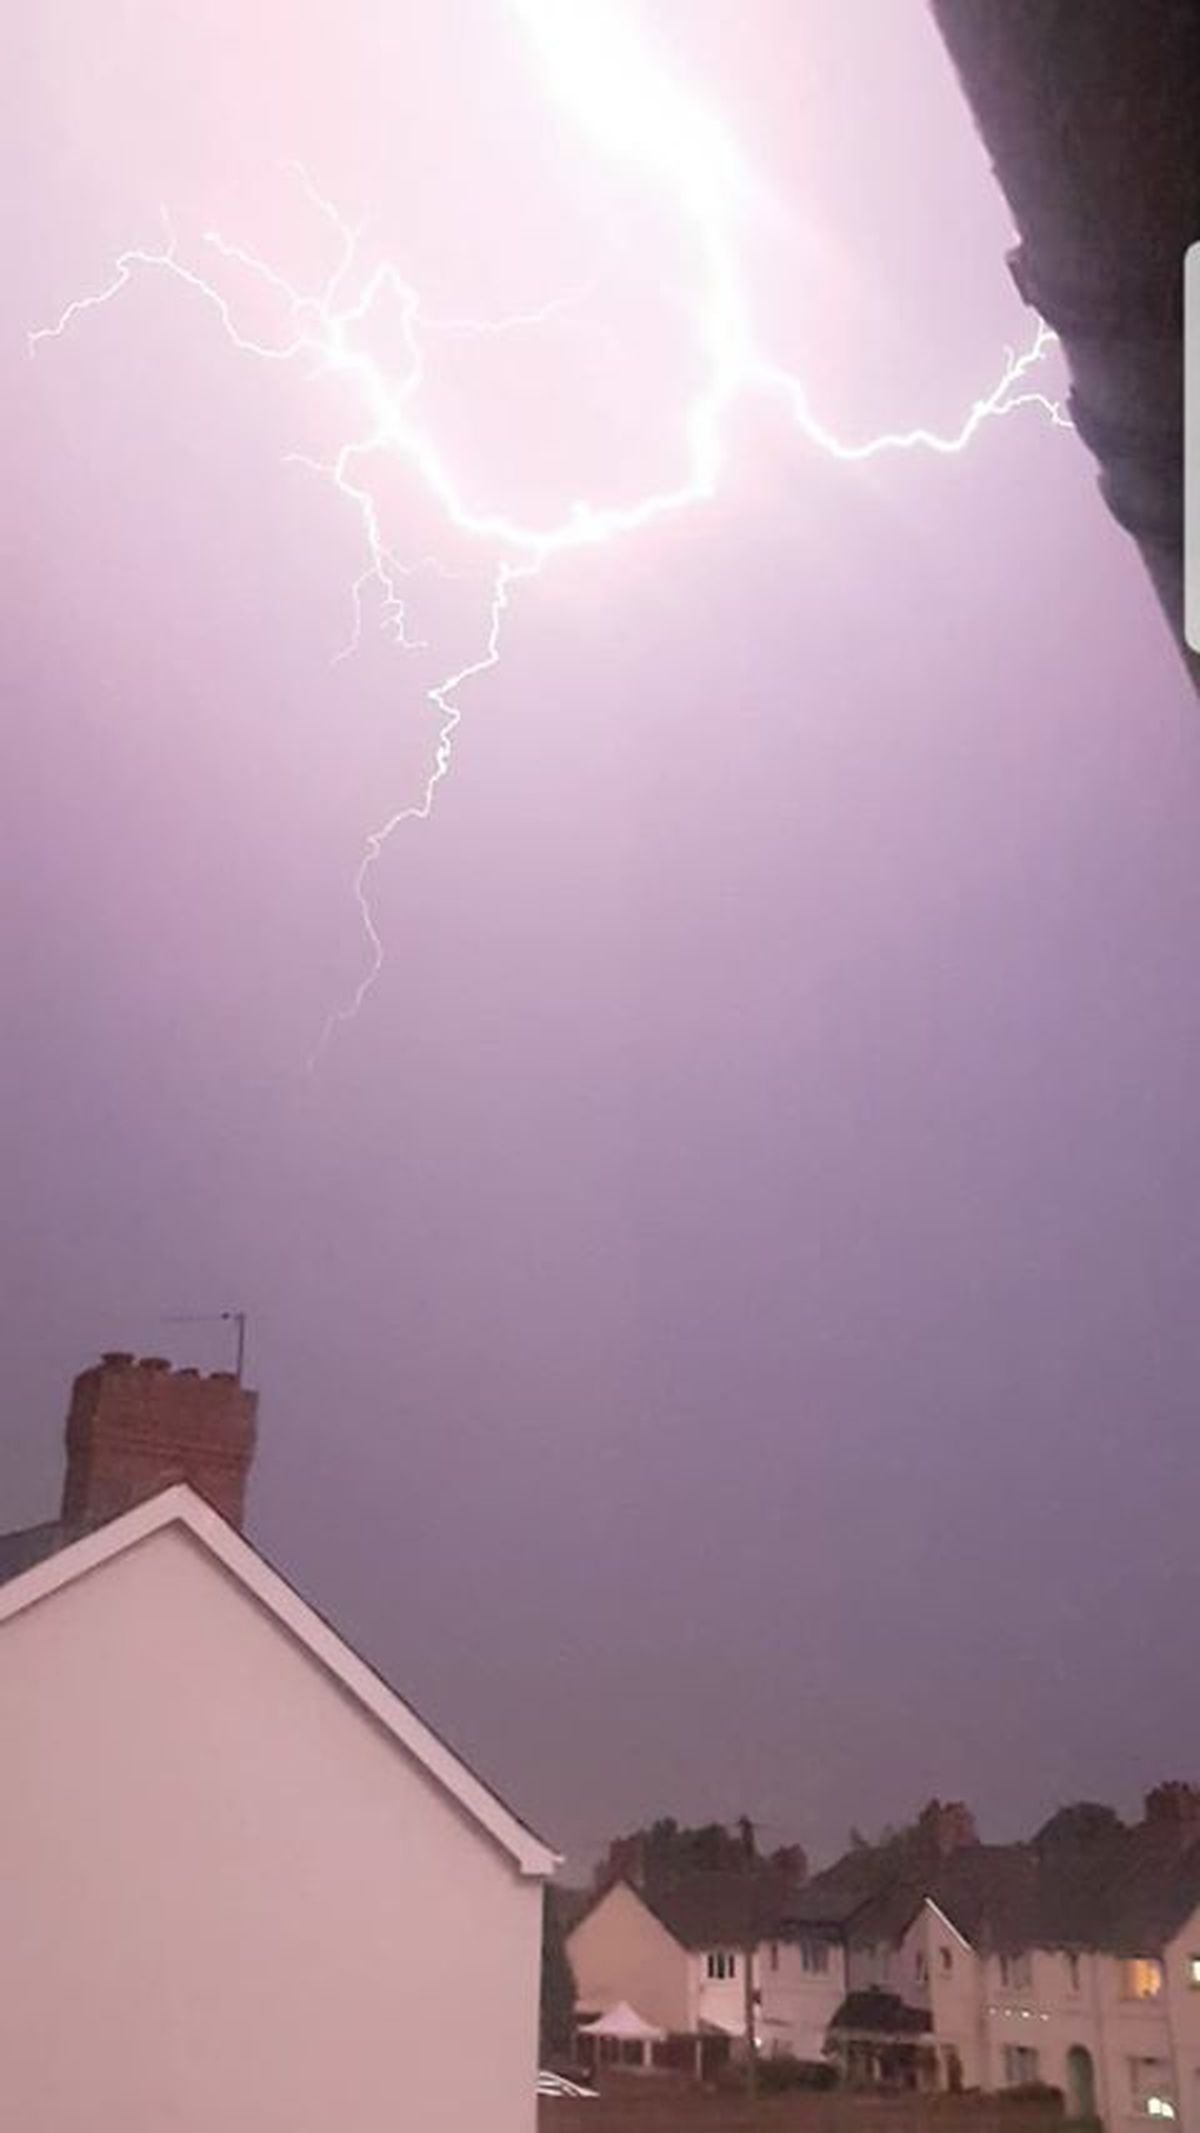 Lightning seen in Willenhall and captured by Kas Tonks